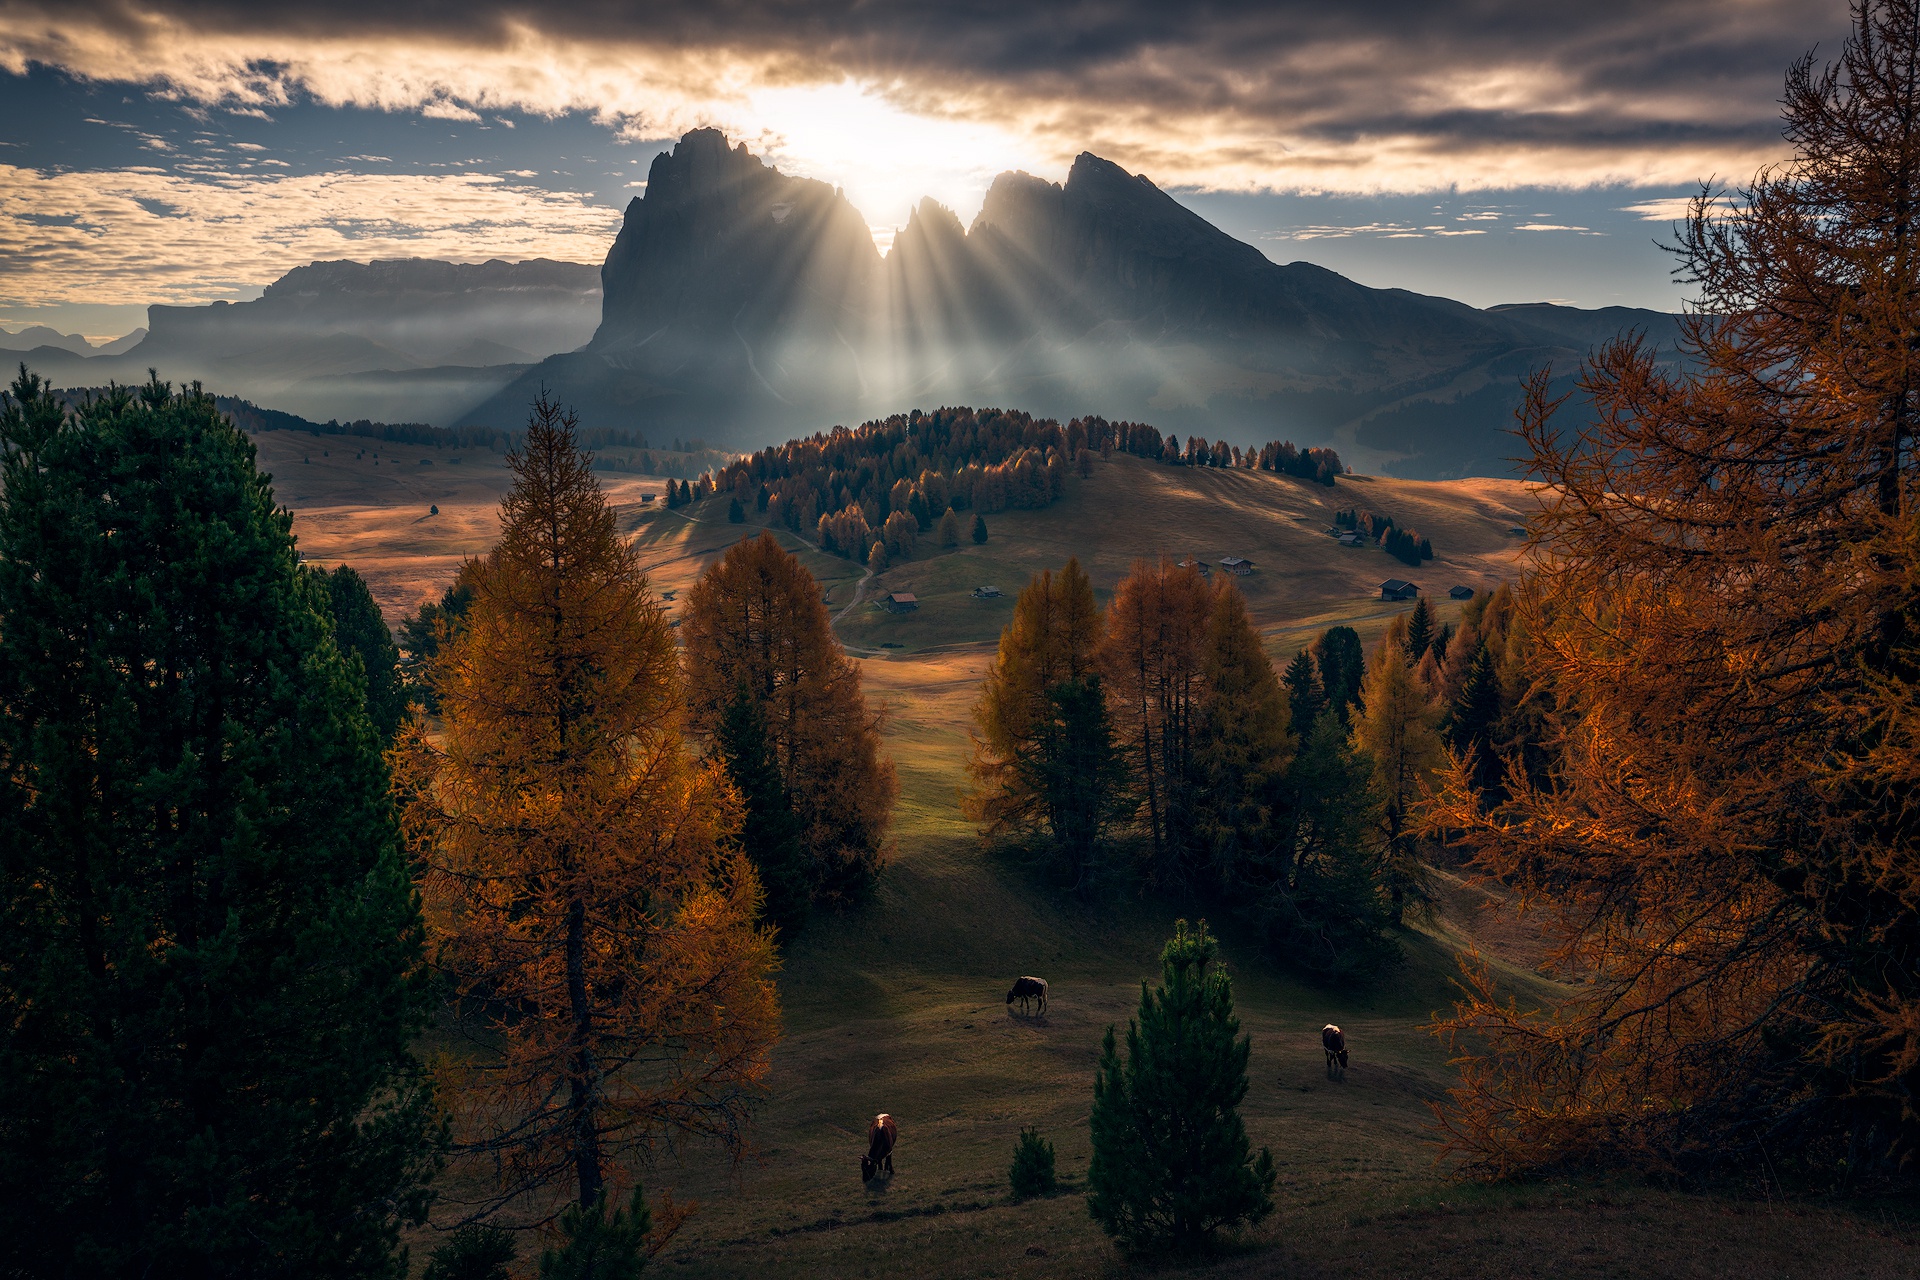 General 1920x1280 Dolomites nature fall clouds animals sun rays landscape hills